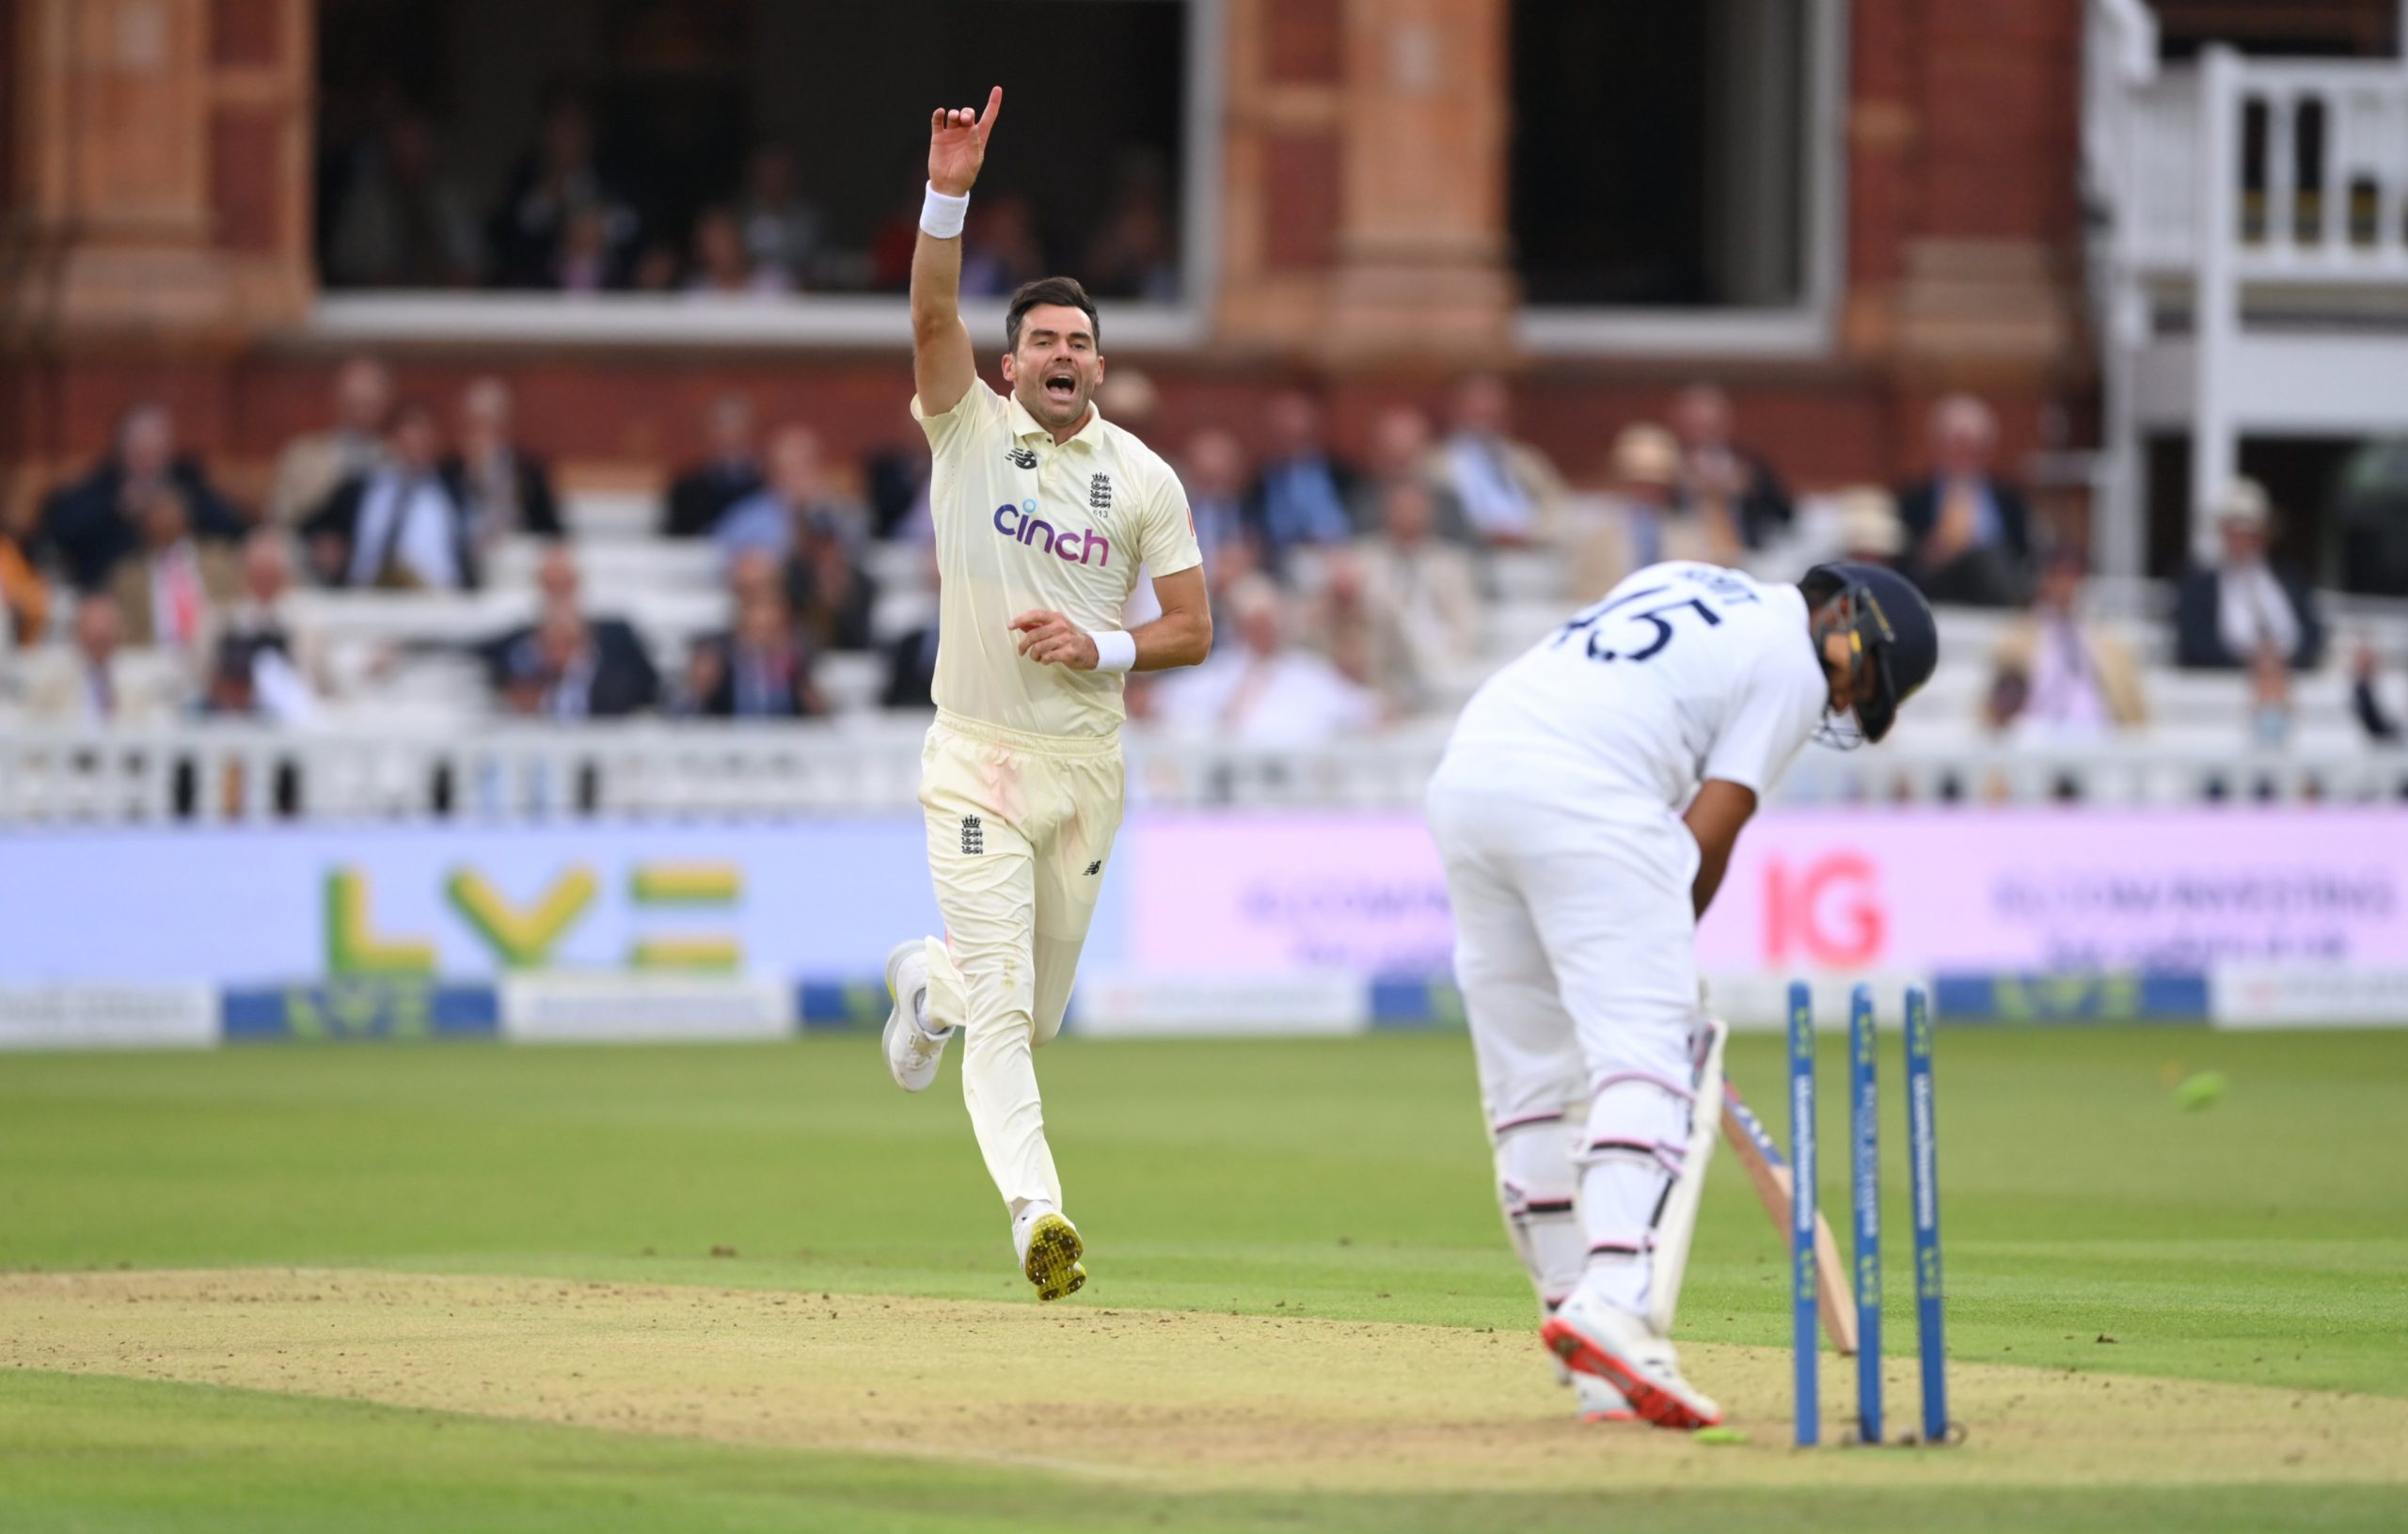 ENG vs IND 2021: Watch: James Anderson Rattles Rohit Sharma’s Stumps